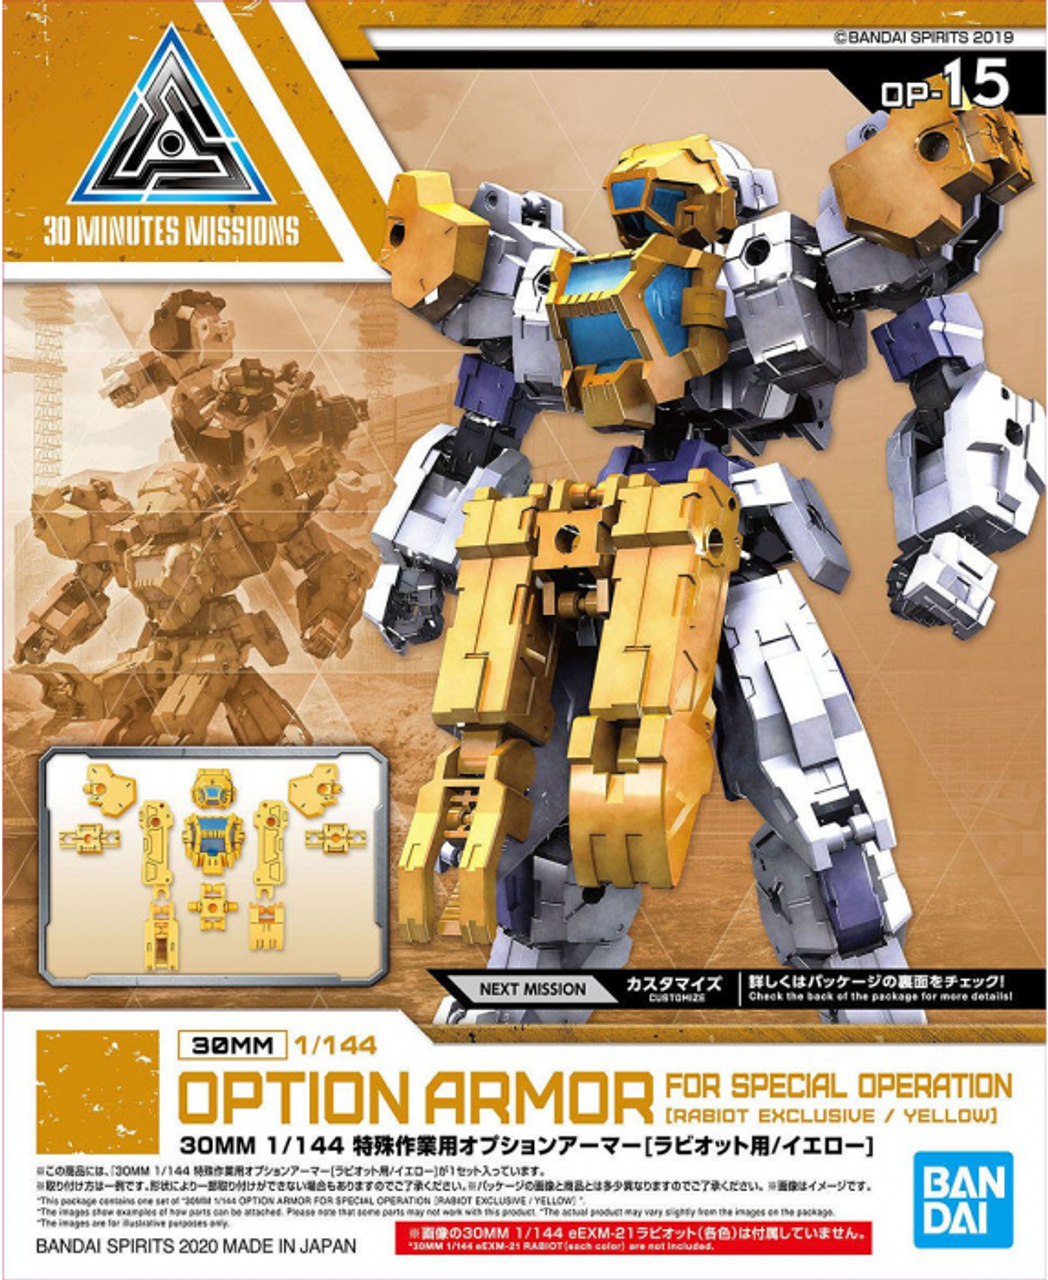 BAN2518740 Bandai Spirits 30 Minute Missions #15 1/144 Rabiot Special Operation Option Armor (Yellow)